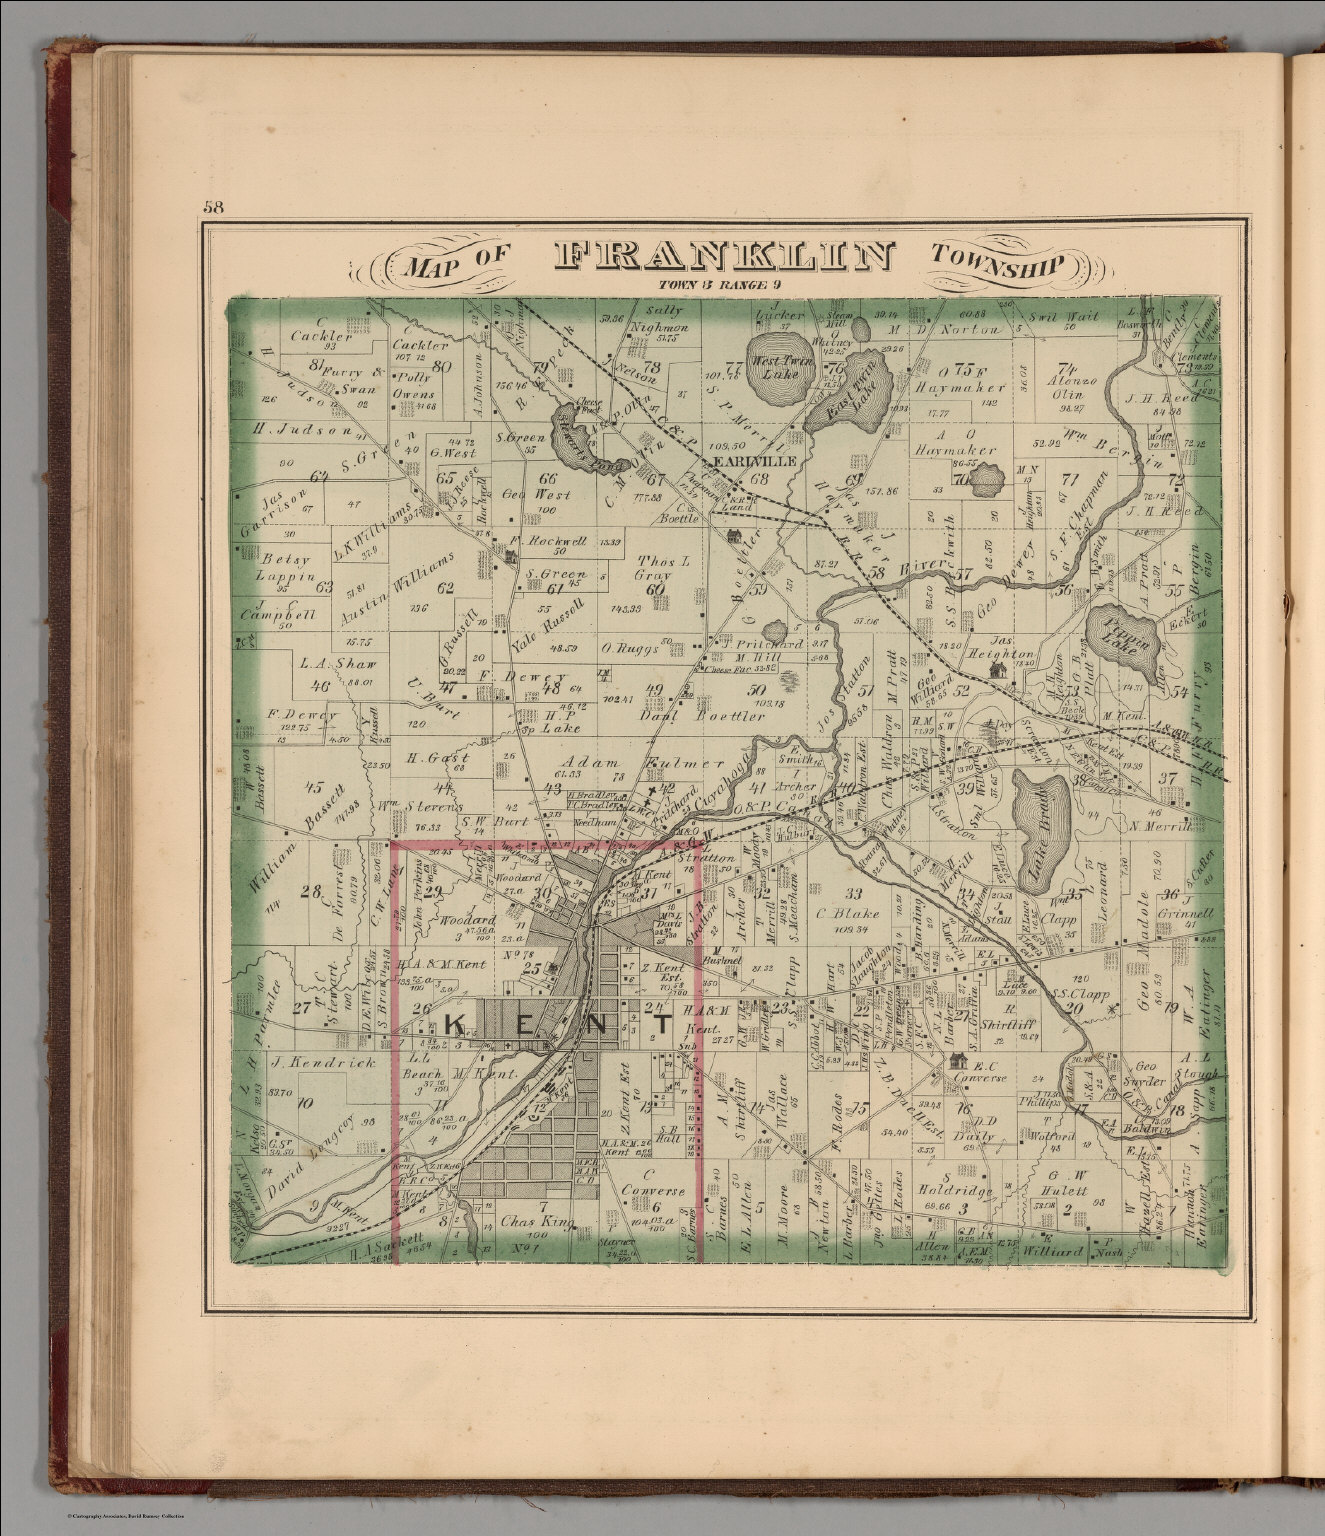 Franklin Township, Portage County, Ohio. David Rumsey Historical Map